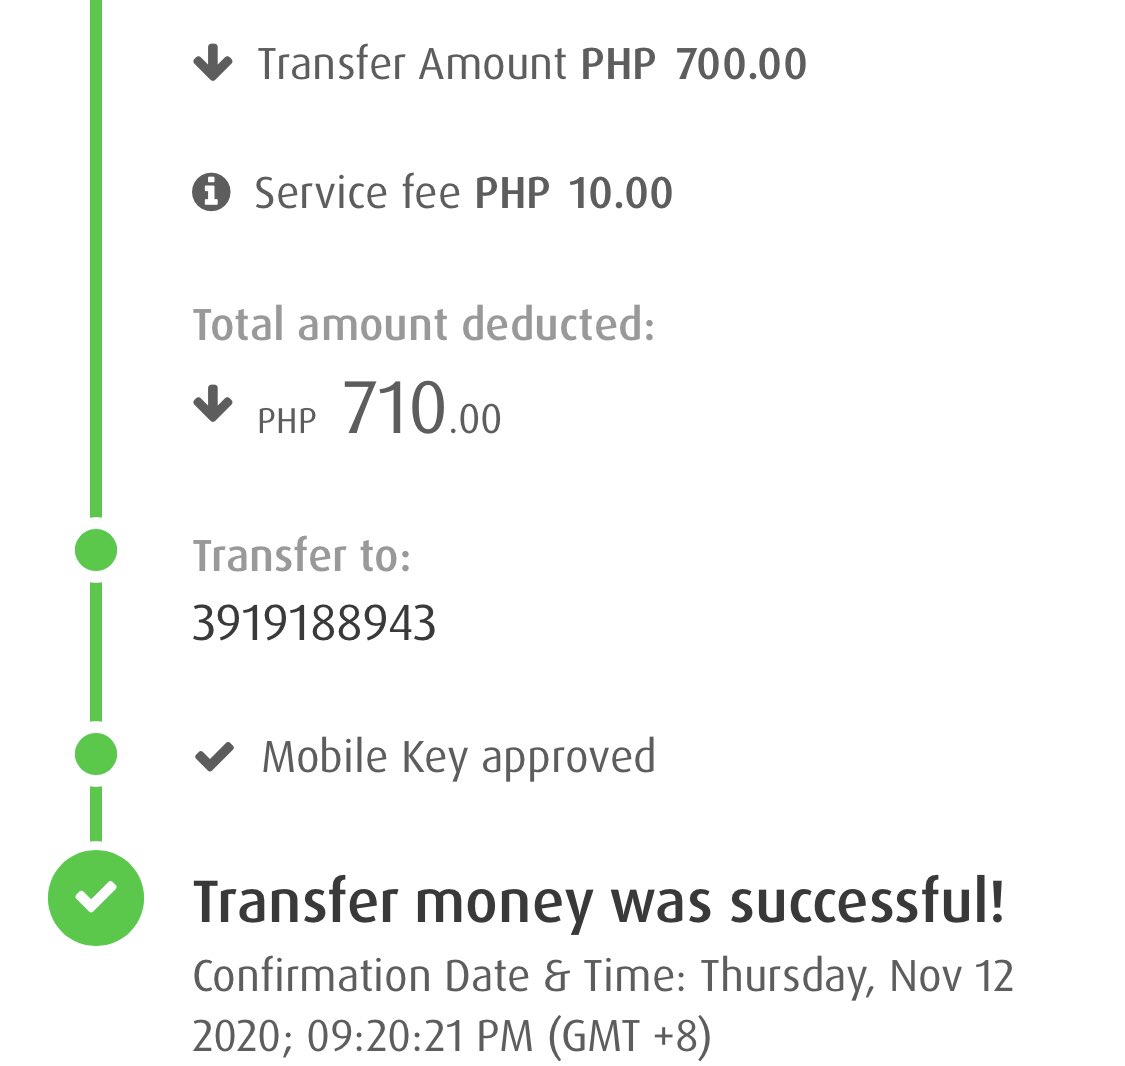 Donated ₱700 to Pagasa PH that's making food packs for evacuation centers and affected communities. Match me.  https://instagram.com/pagasa.ph 